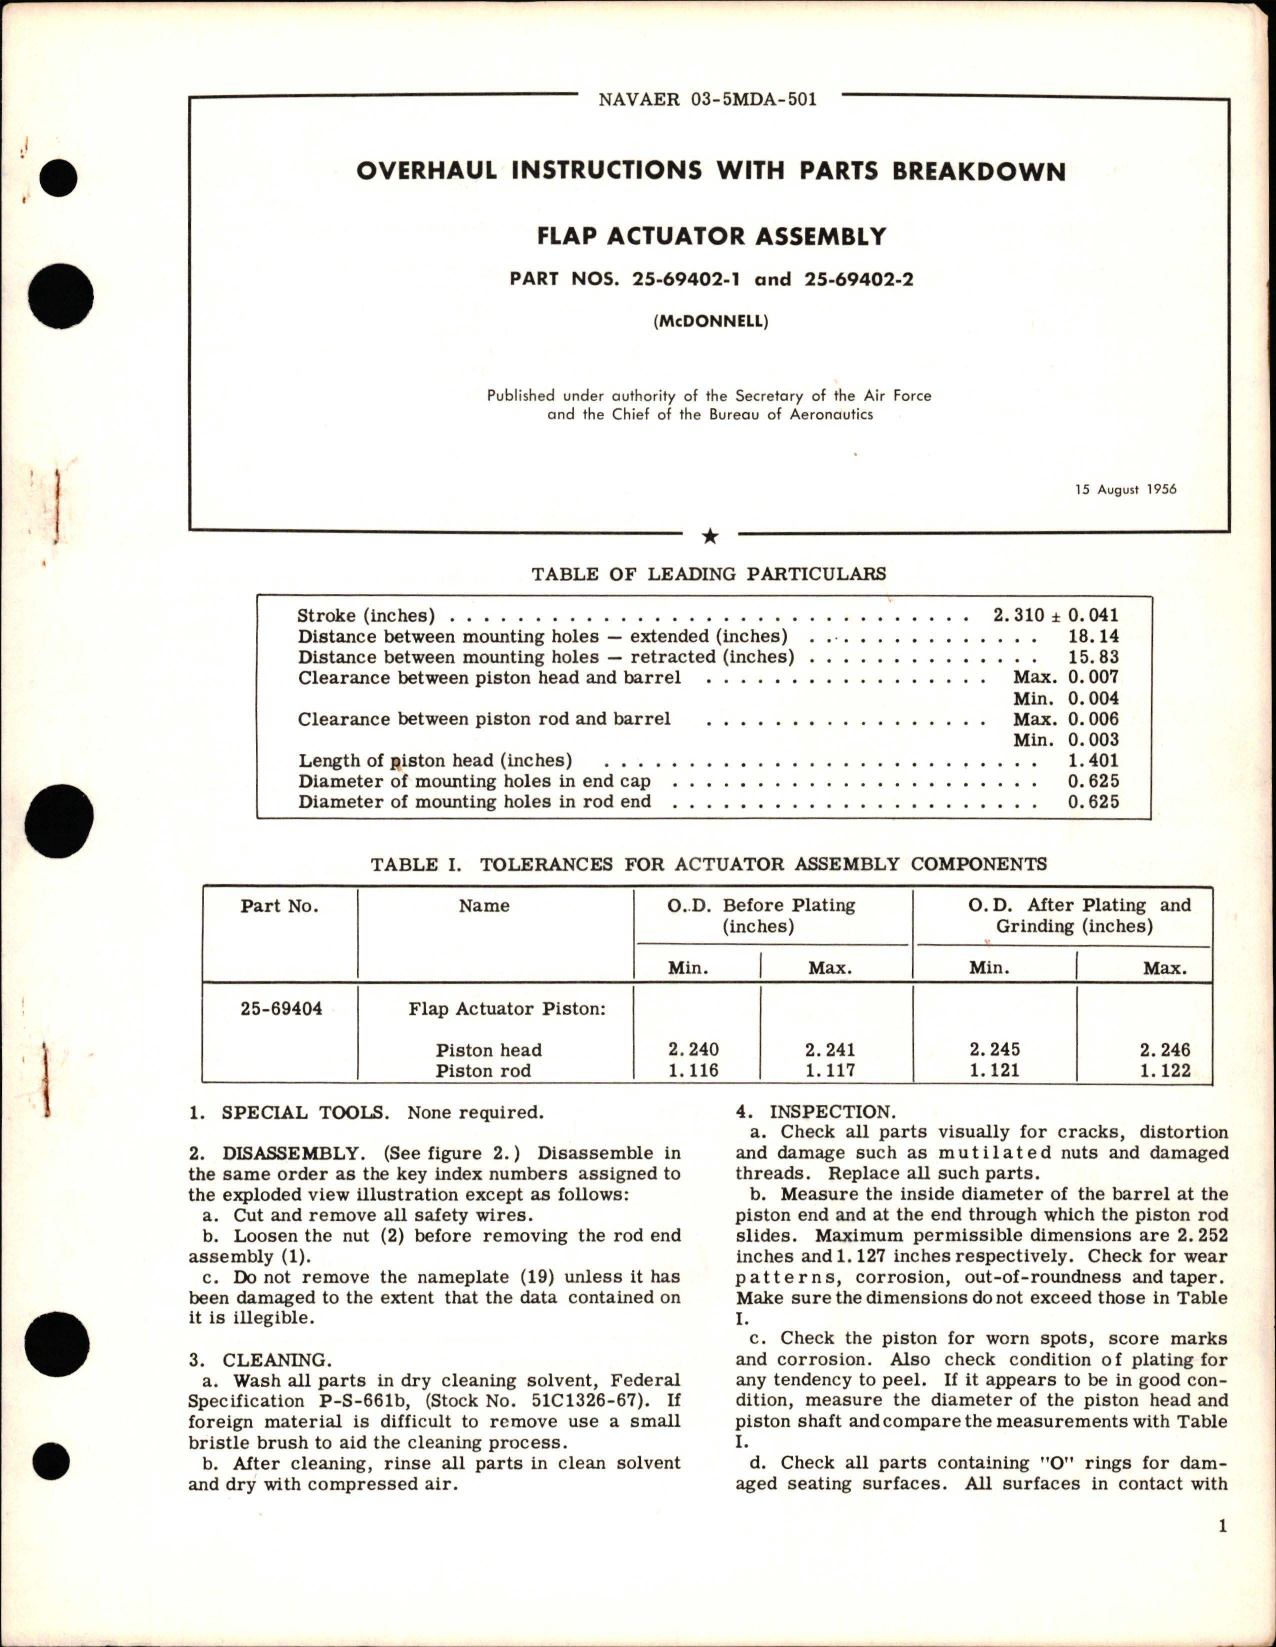 Sample page 1 from AirCorps Library document: Overhaul Instructions with Parts Breakdown for Flap Actuator Assembly - Parts 25-69402-1 and 25-69402-2 